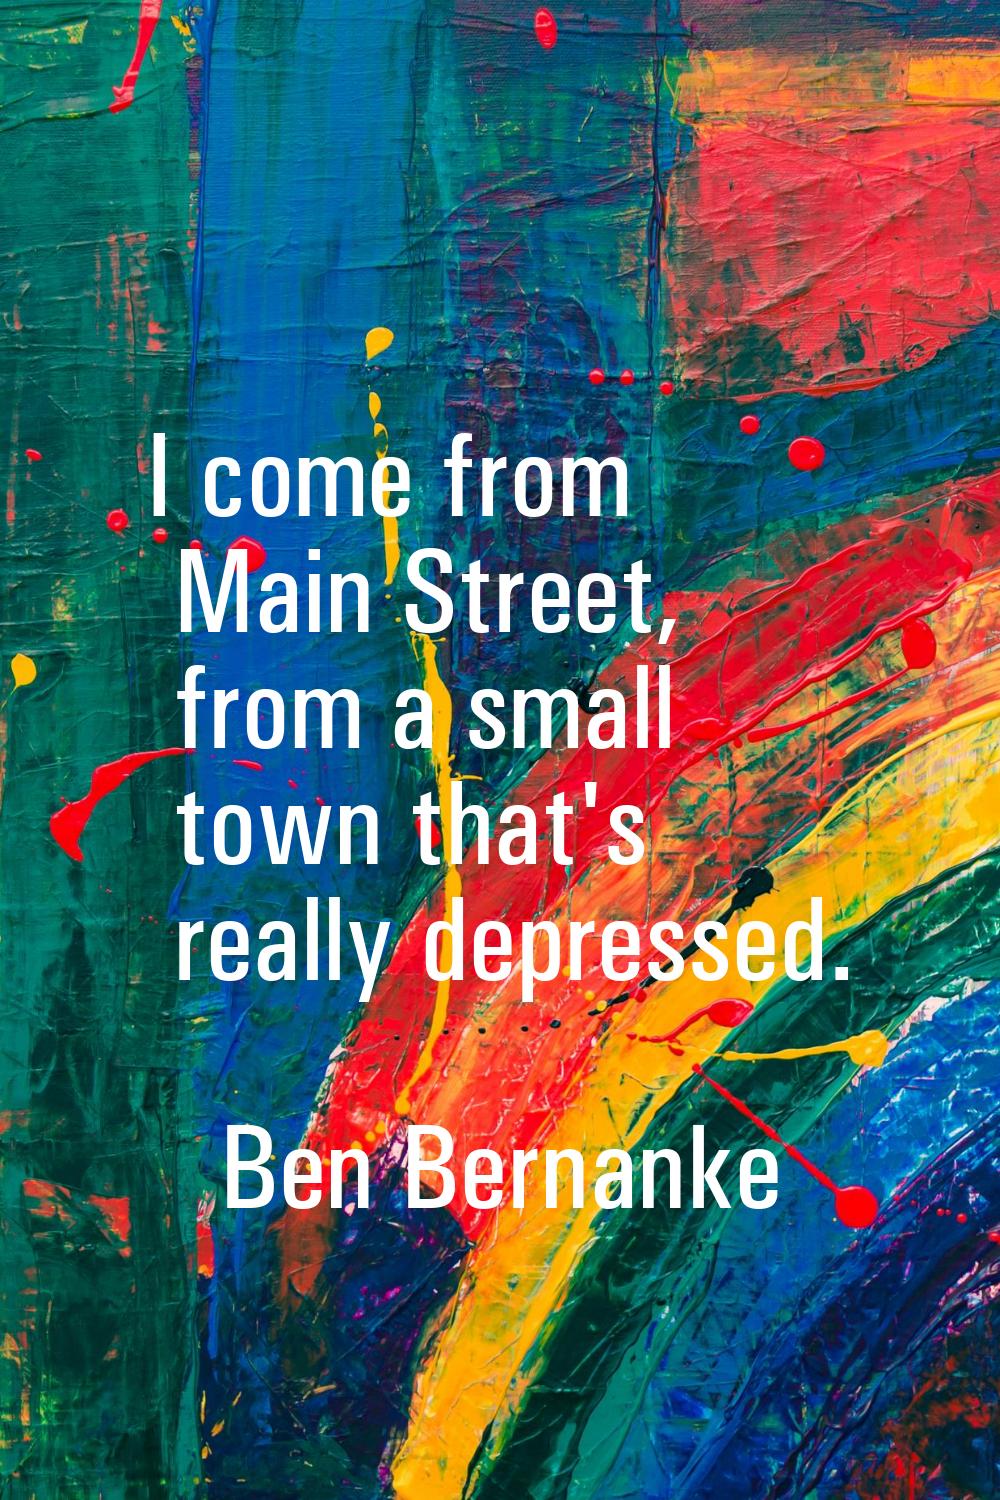 I come from Main Street, from a small town that's really depressed.